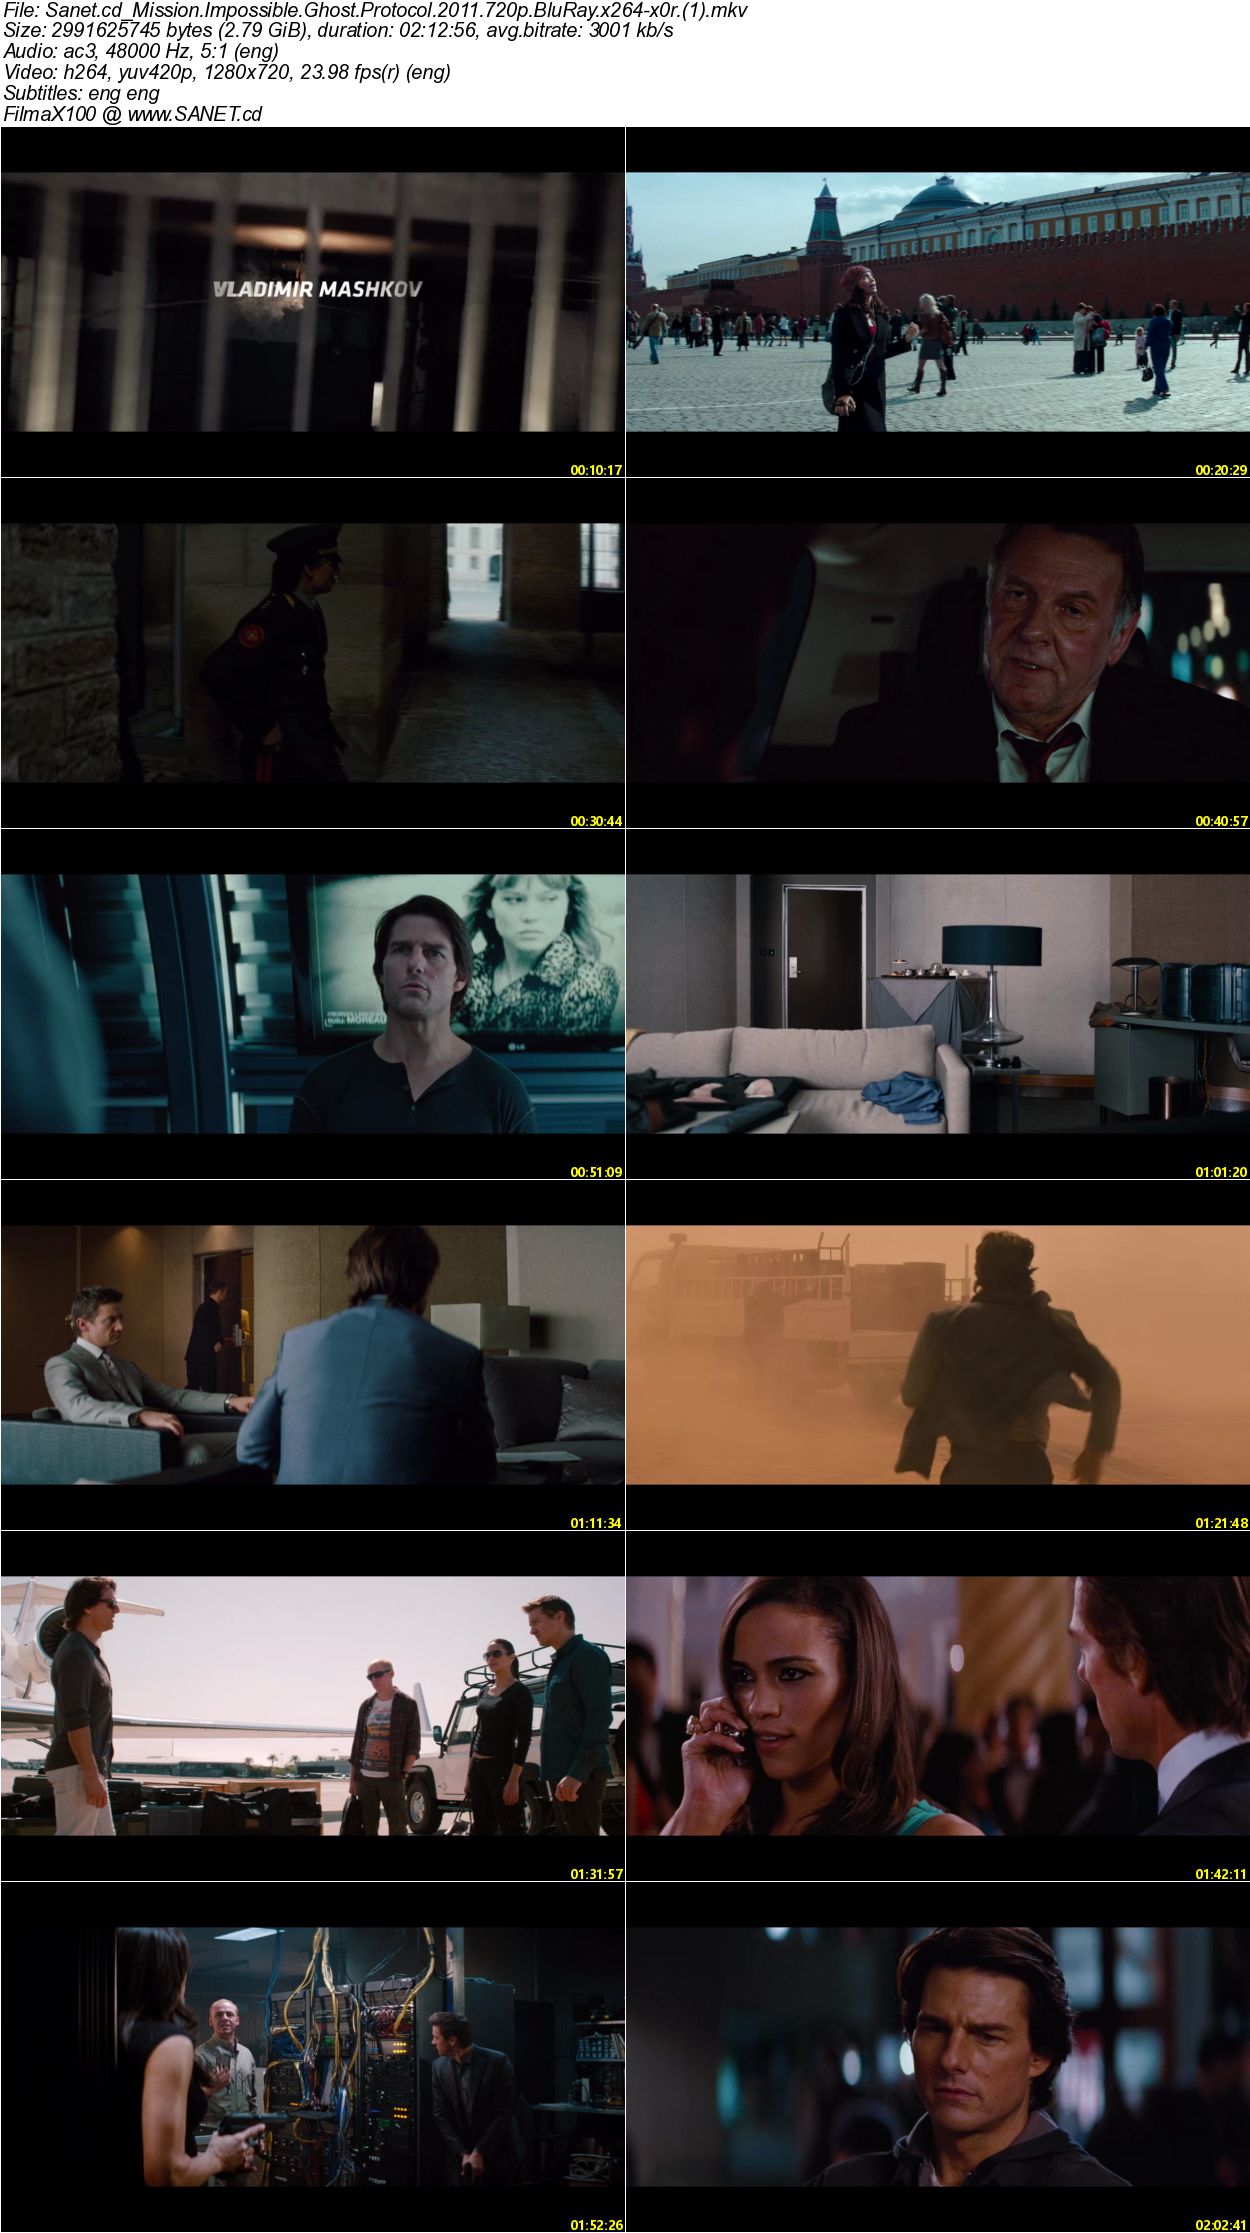 mission impossible ghost protacol in hindi 720p torrent